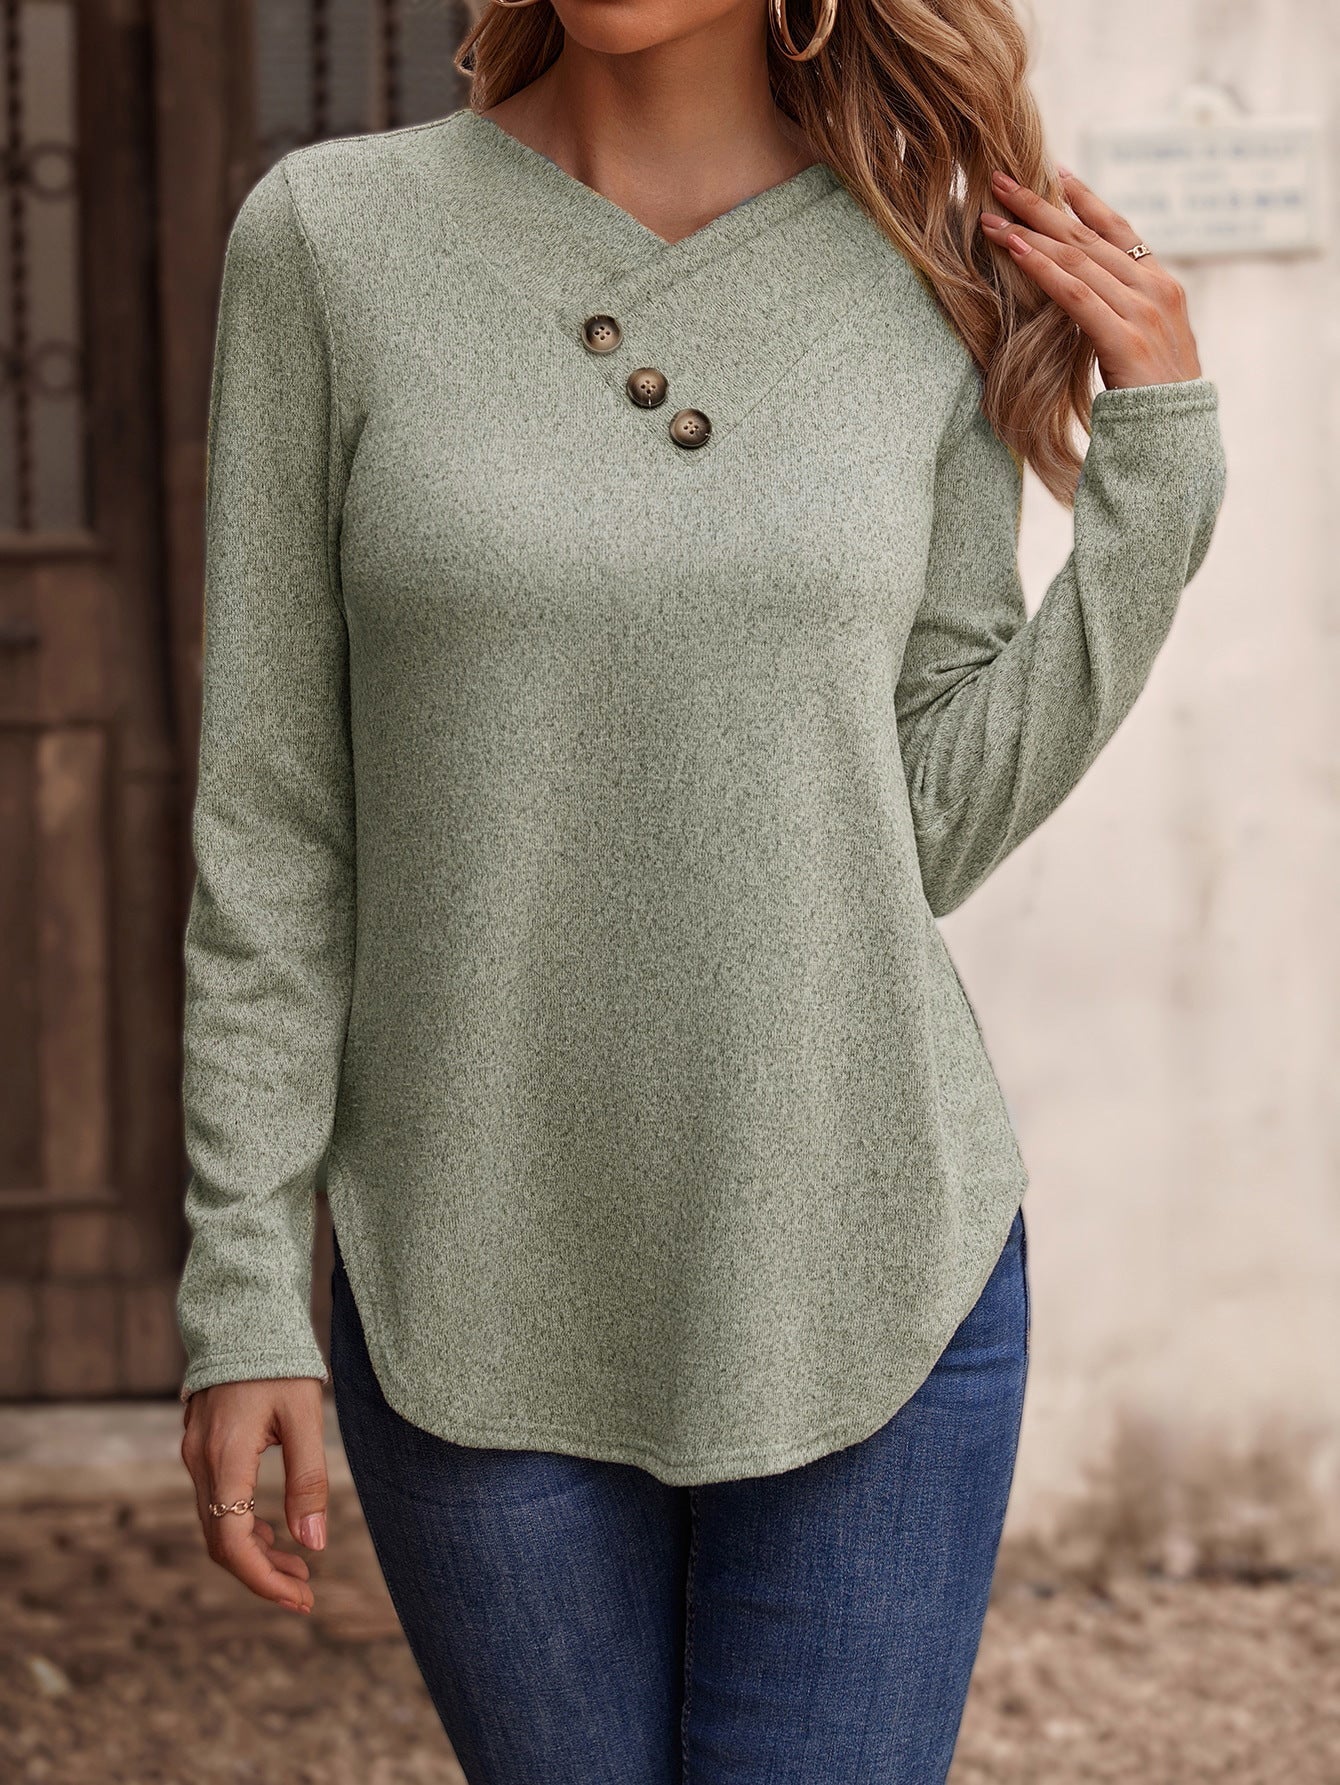 Women's Solid Color V-Neck Long Sleeve Casual Top